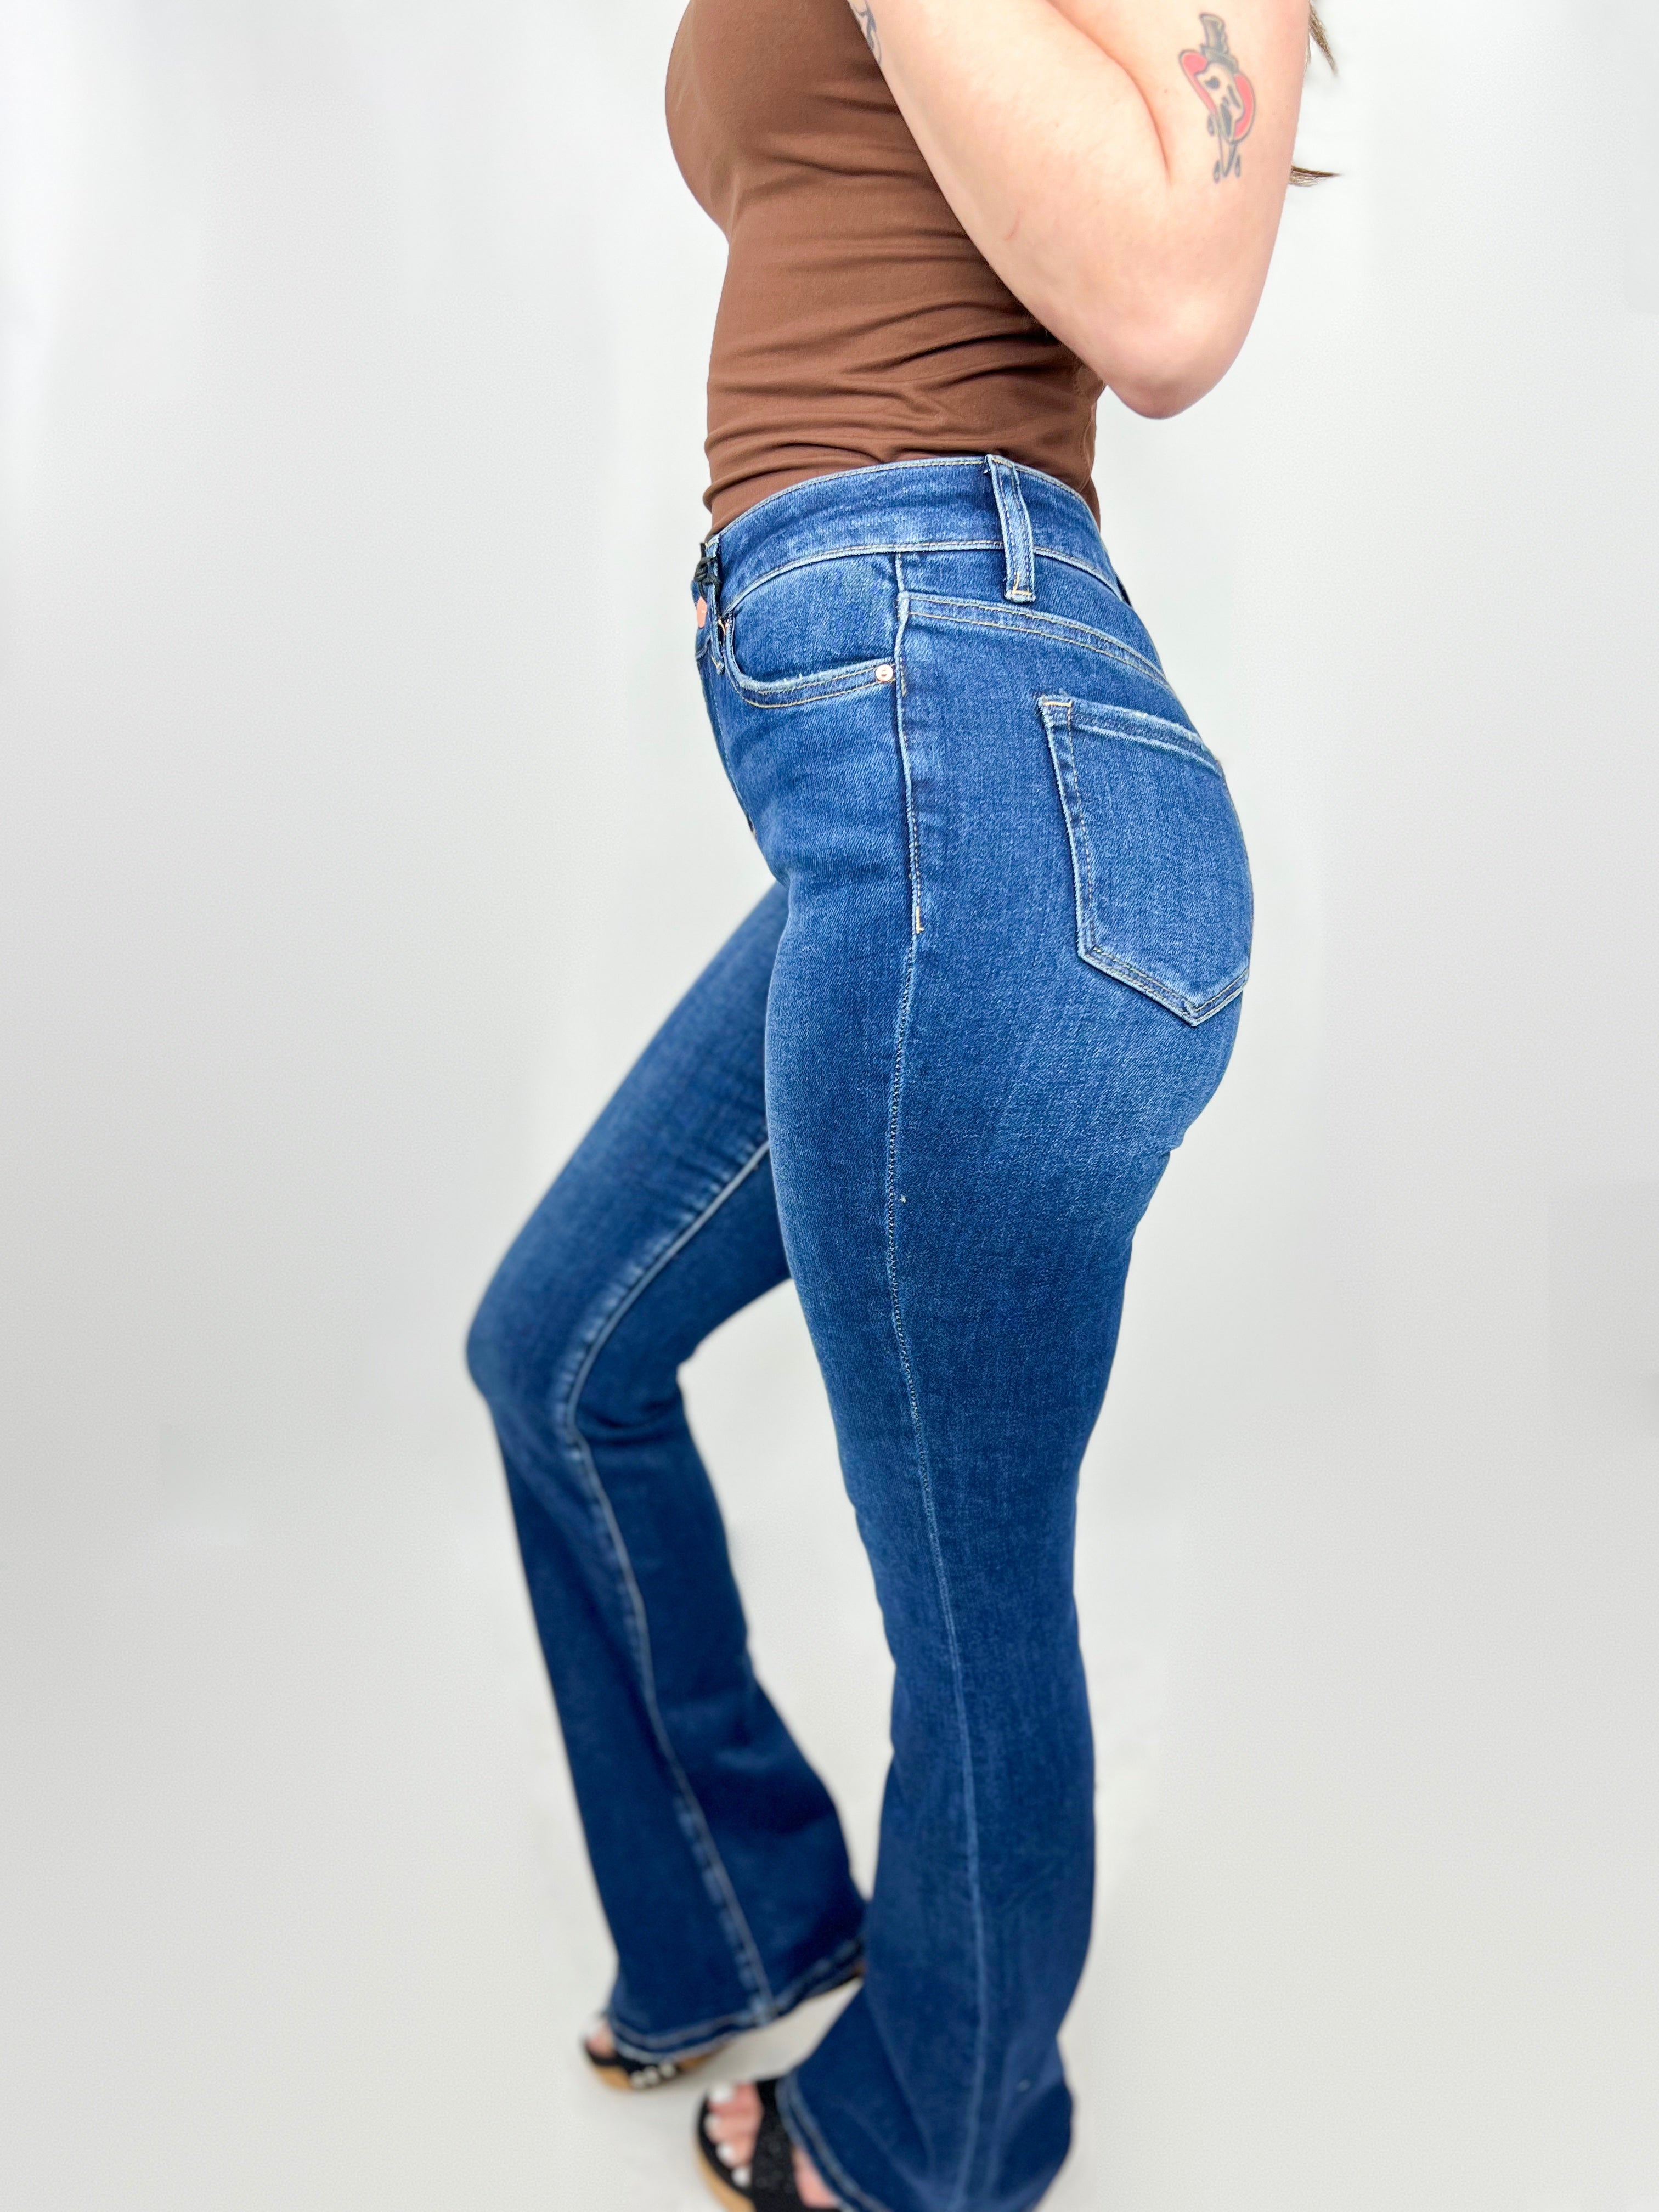 Verity Flare Jeans by Mica-190 Jeans-Mica Denim-Heathered Boho Boutique, Women's Fashion and Accessories in Palmetto, FL